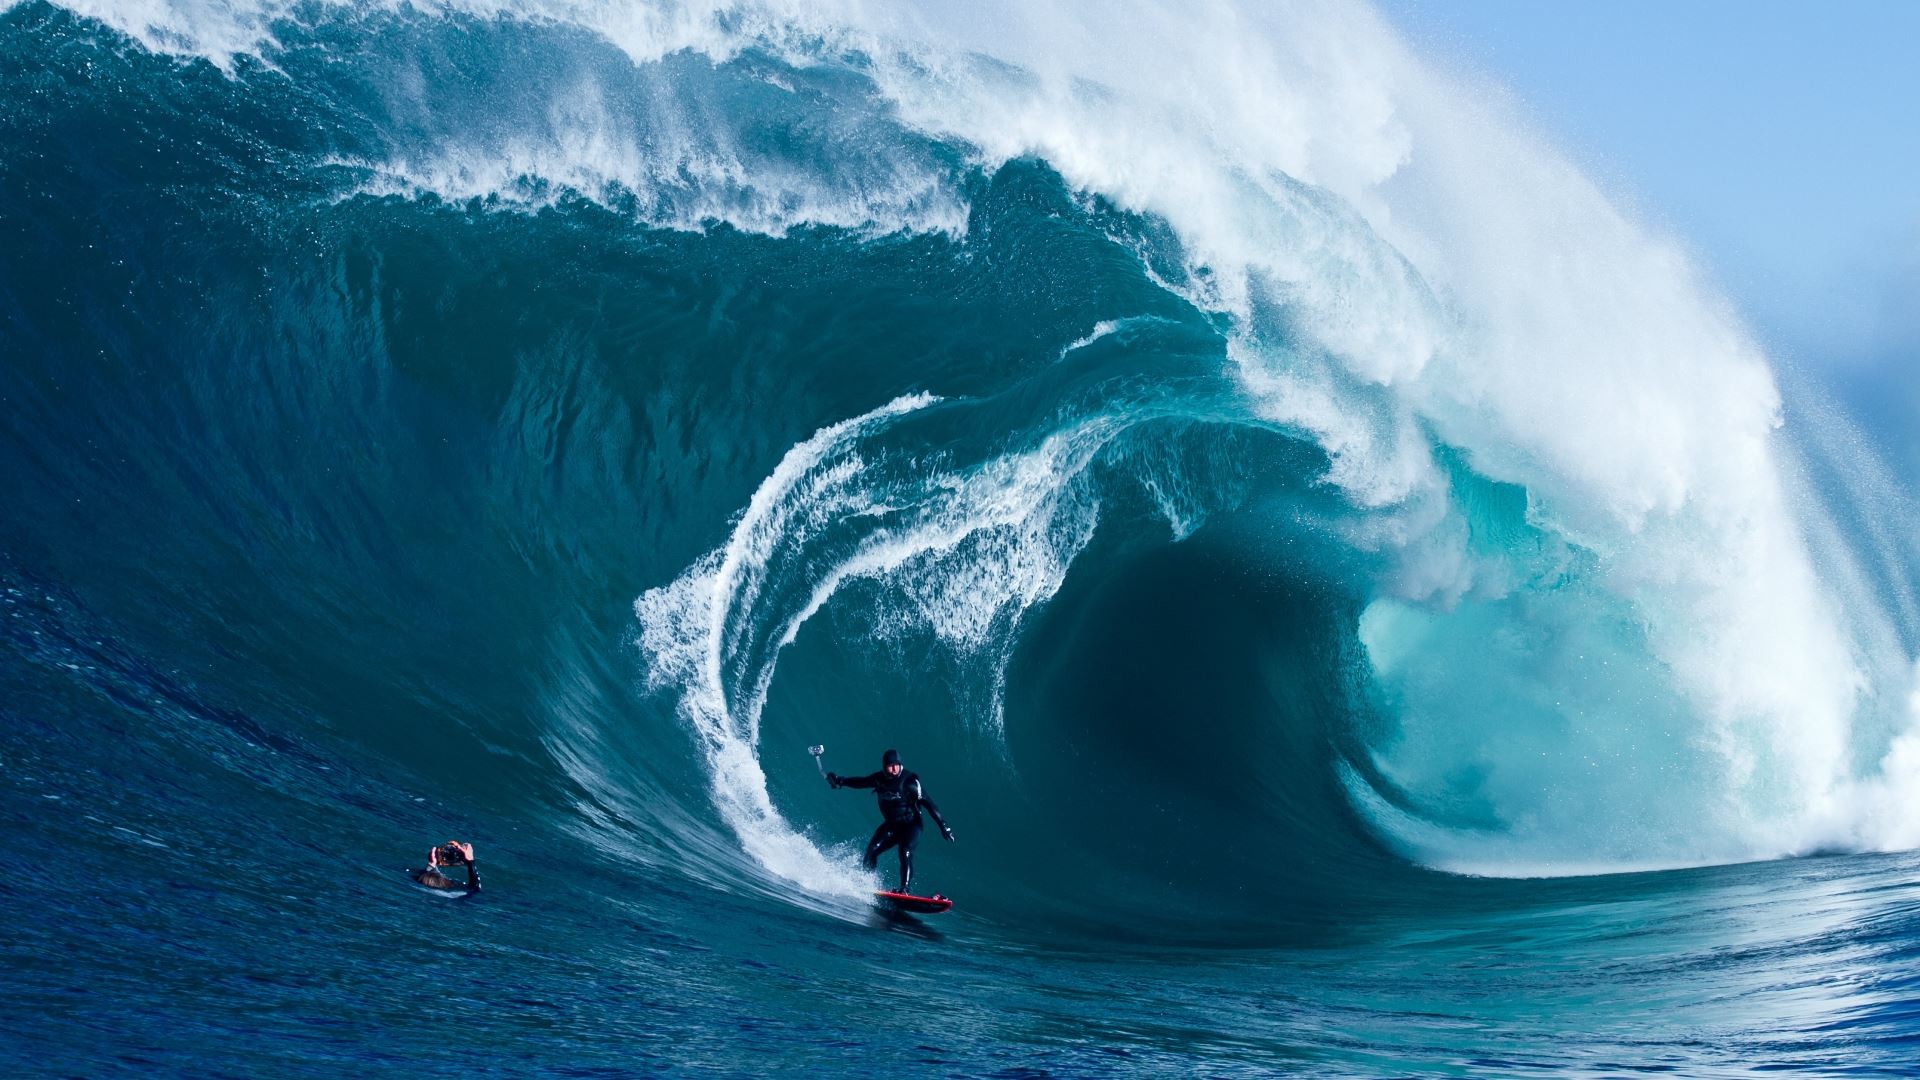 Very extreme surfing, huge waves – HD wallpaper download